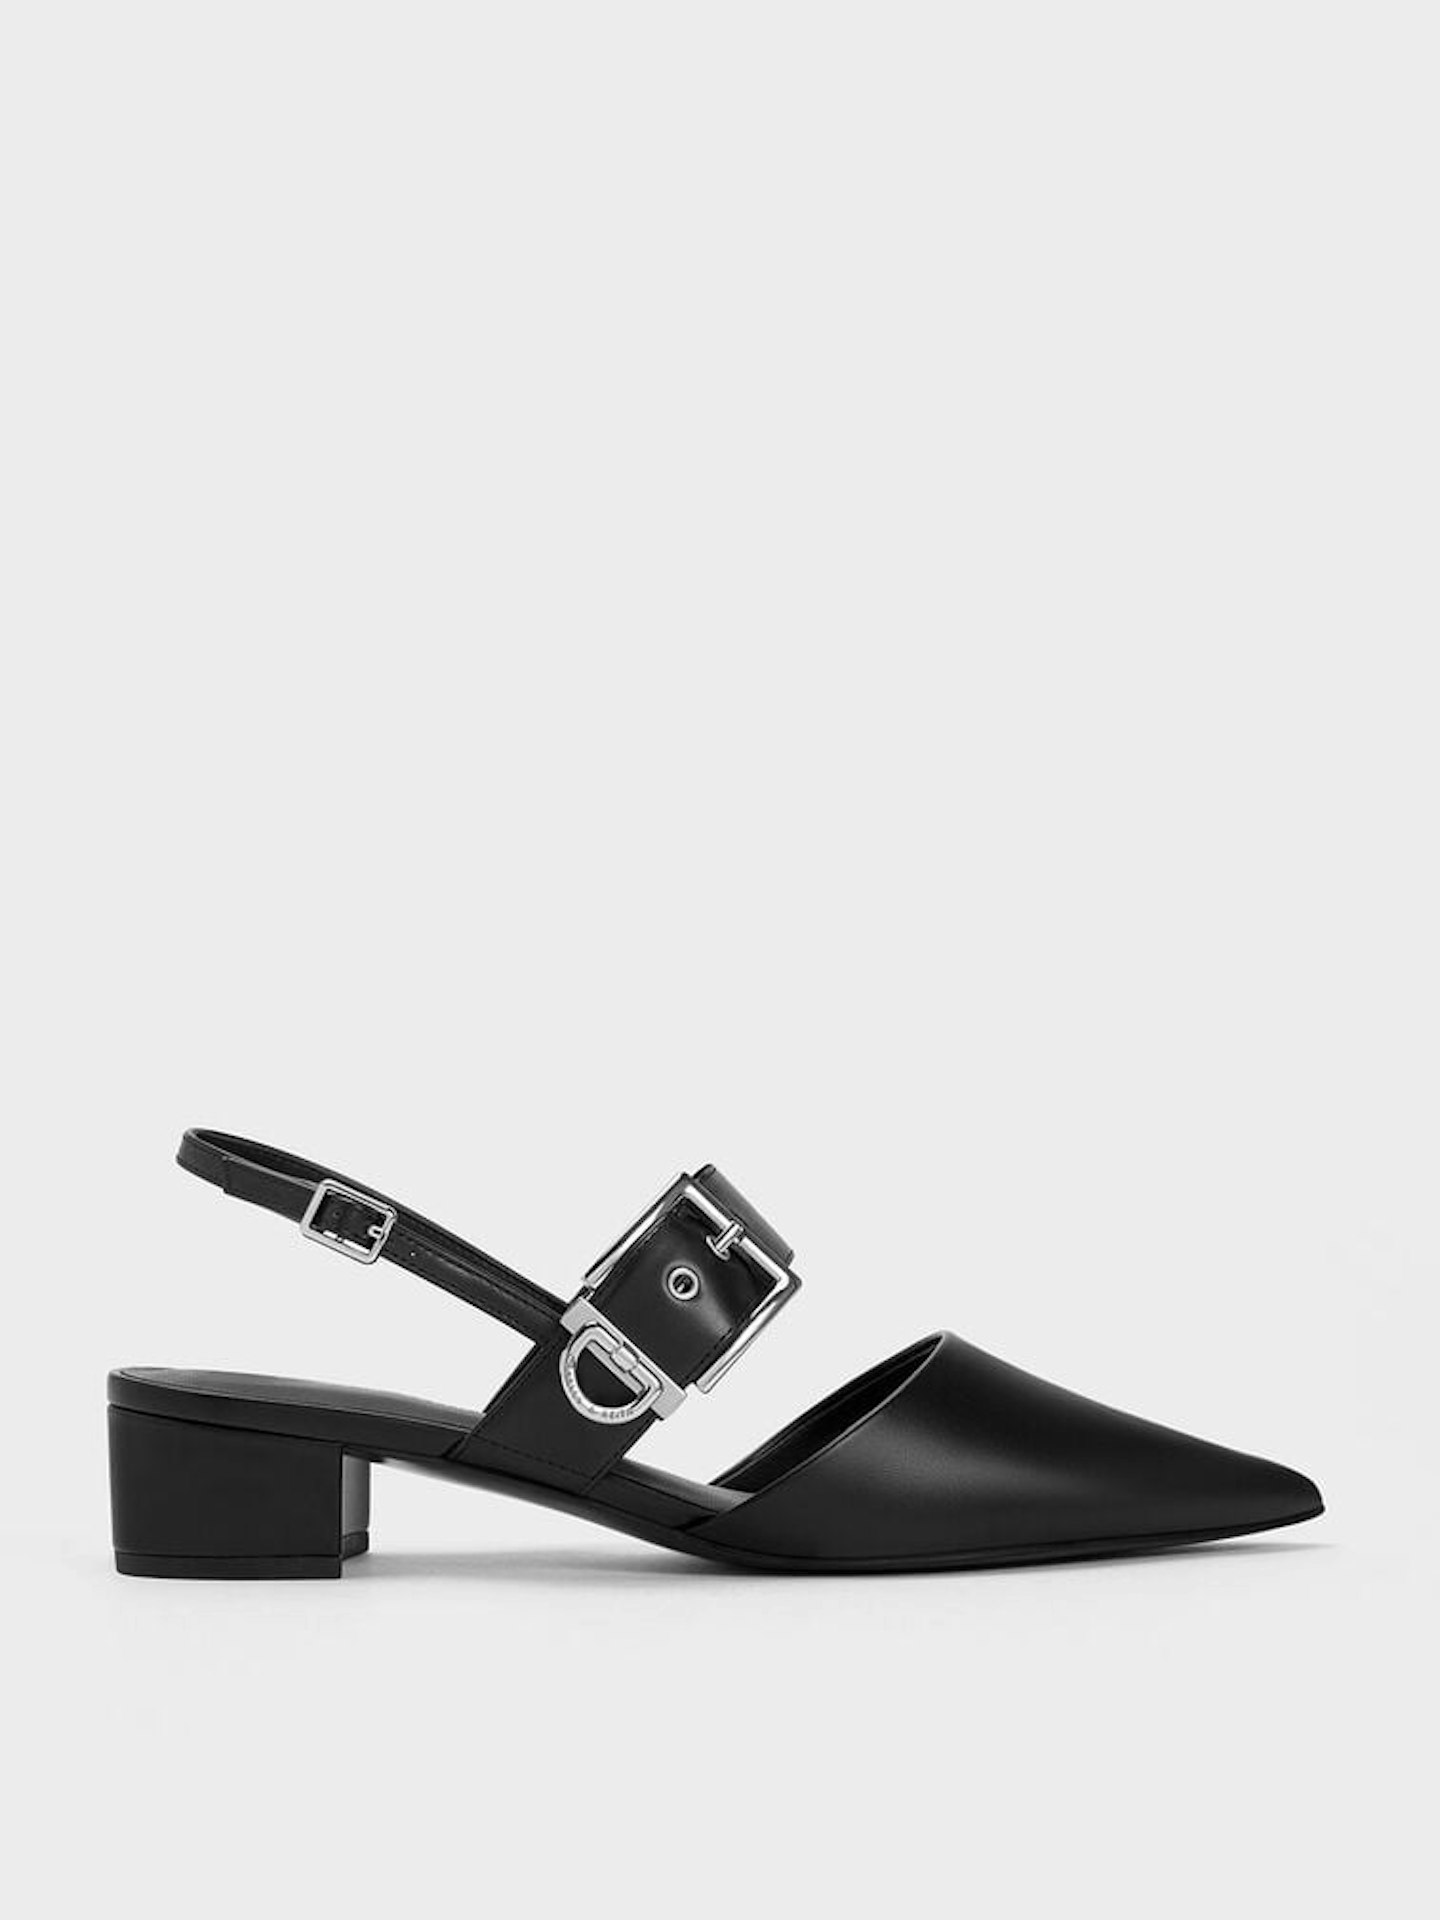 Charles & Keith Buckled Strap Slingback Pumps